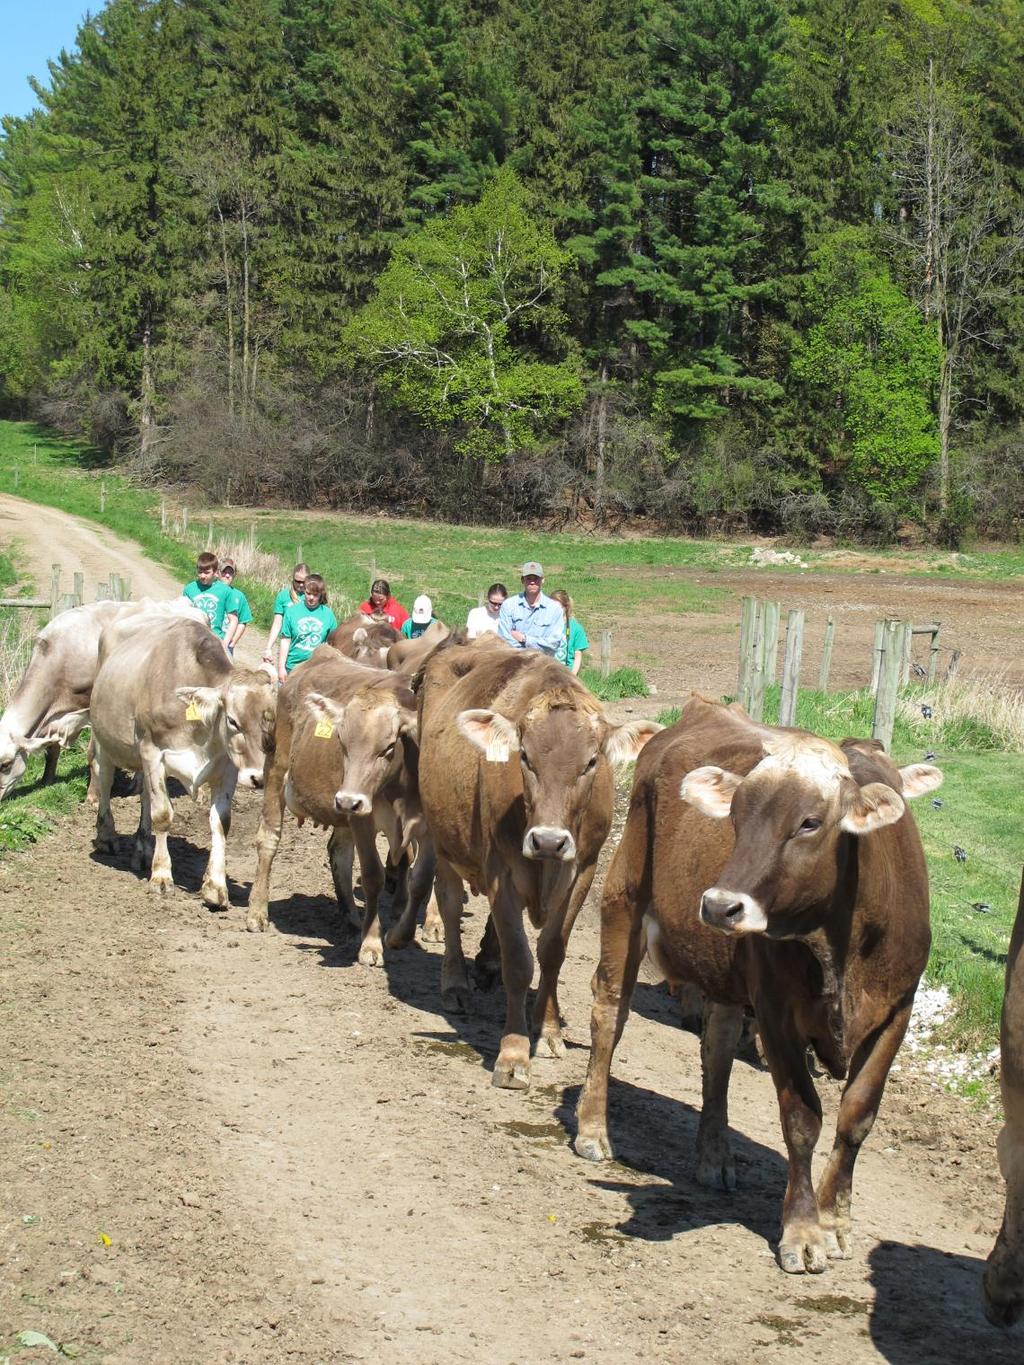 4-H ers leading the cows